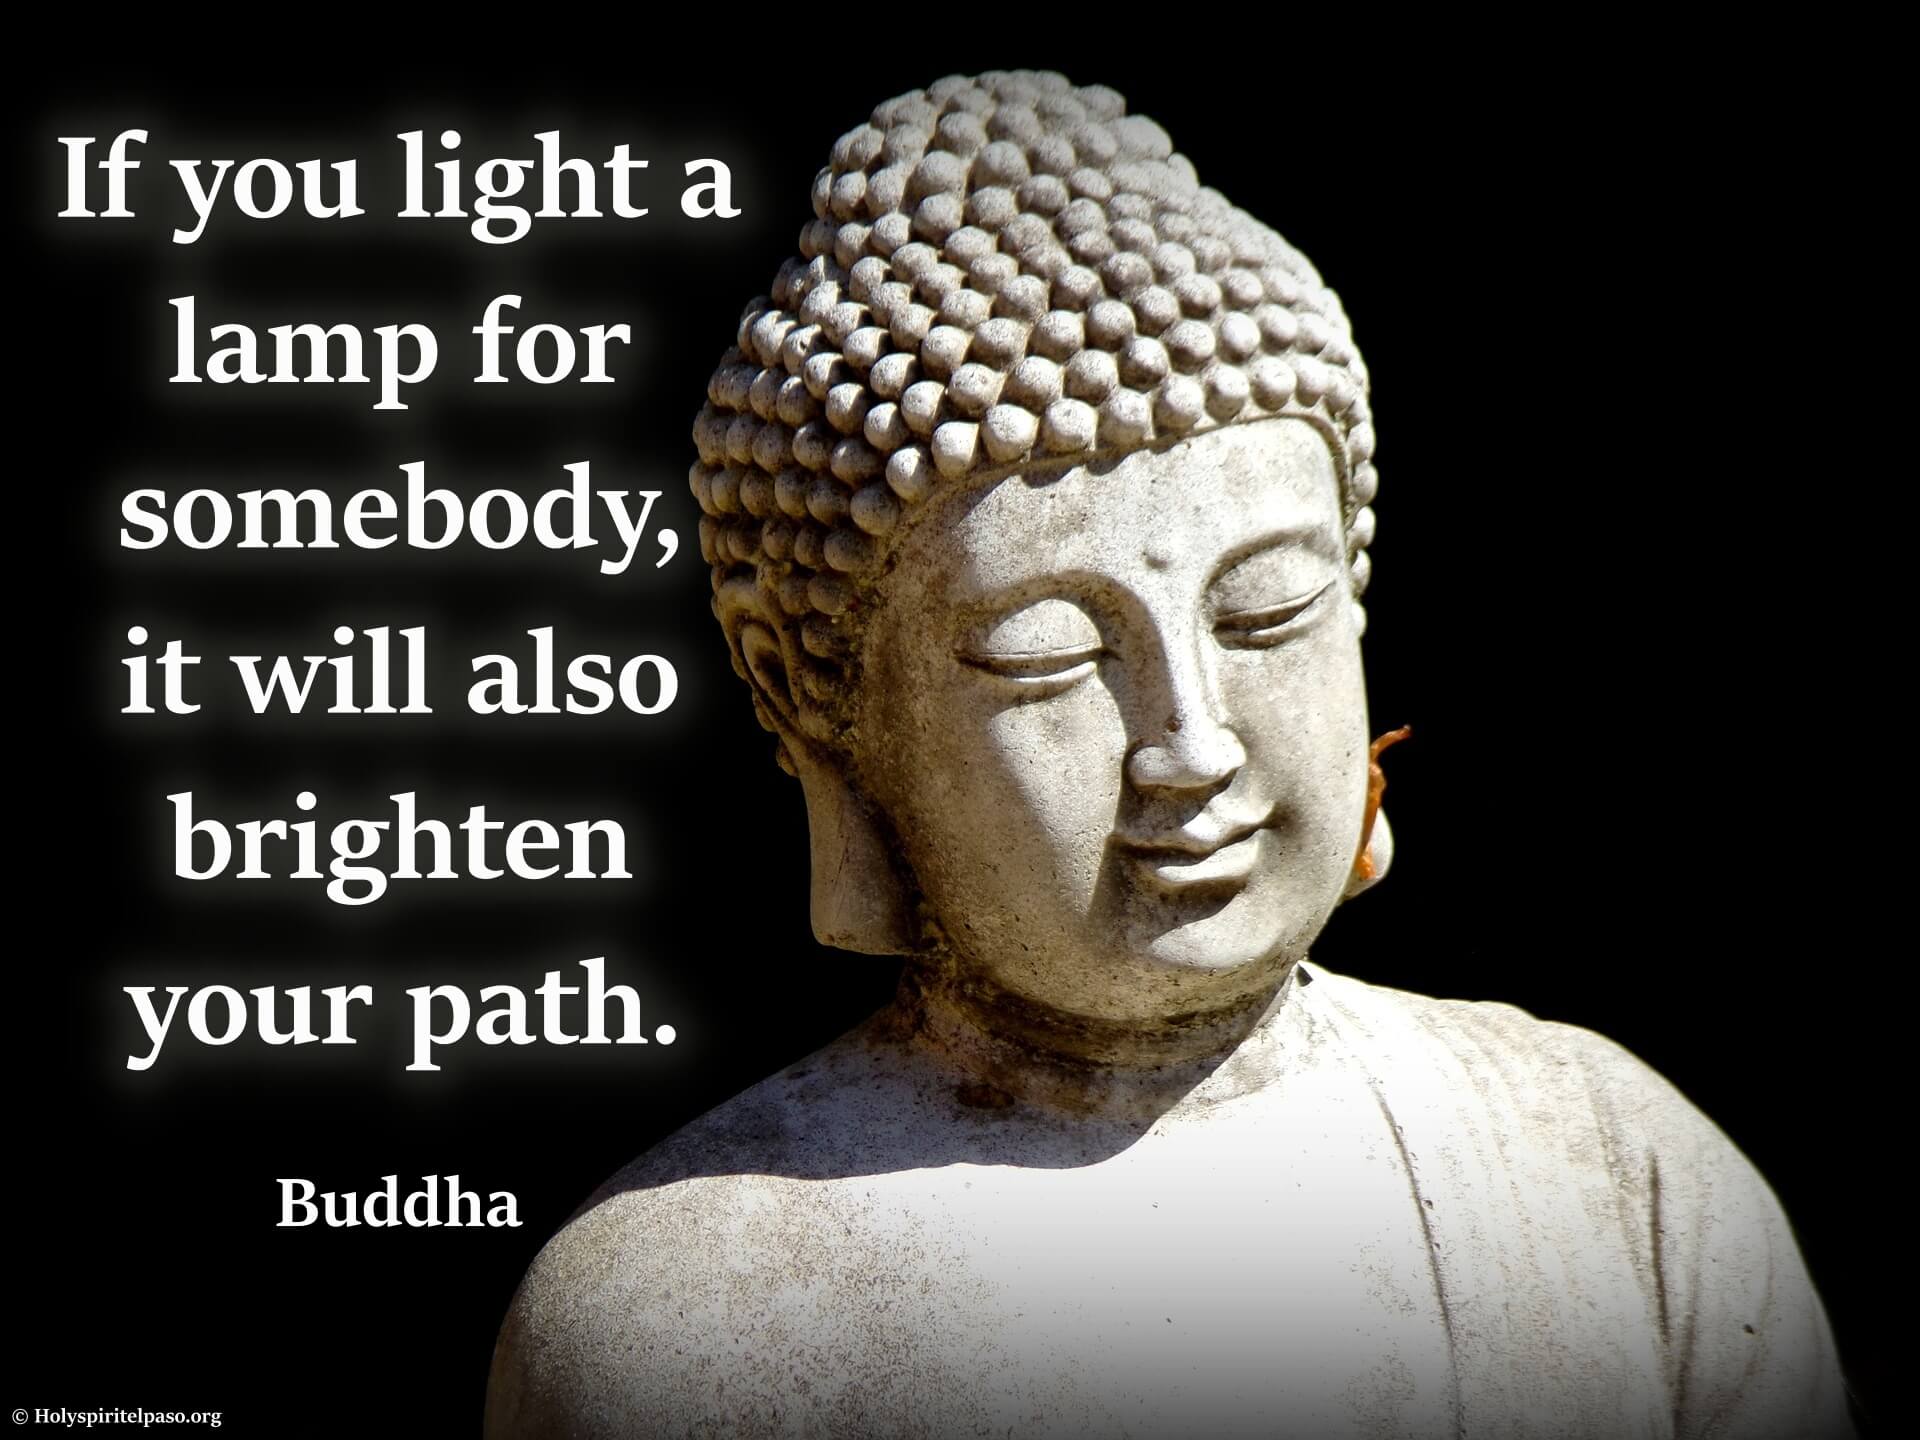 Buddha Quotes On Love - 53 Love and Happiness Quotes From Buddha